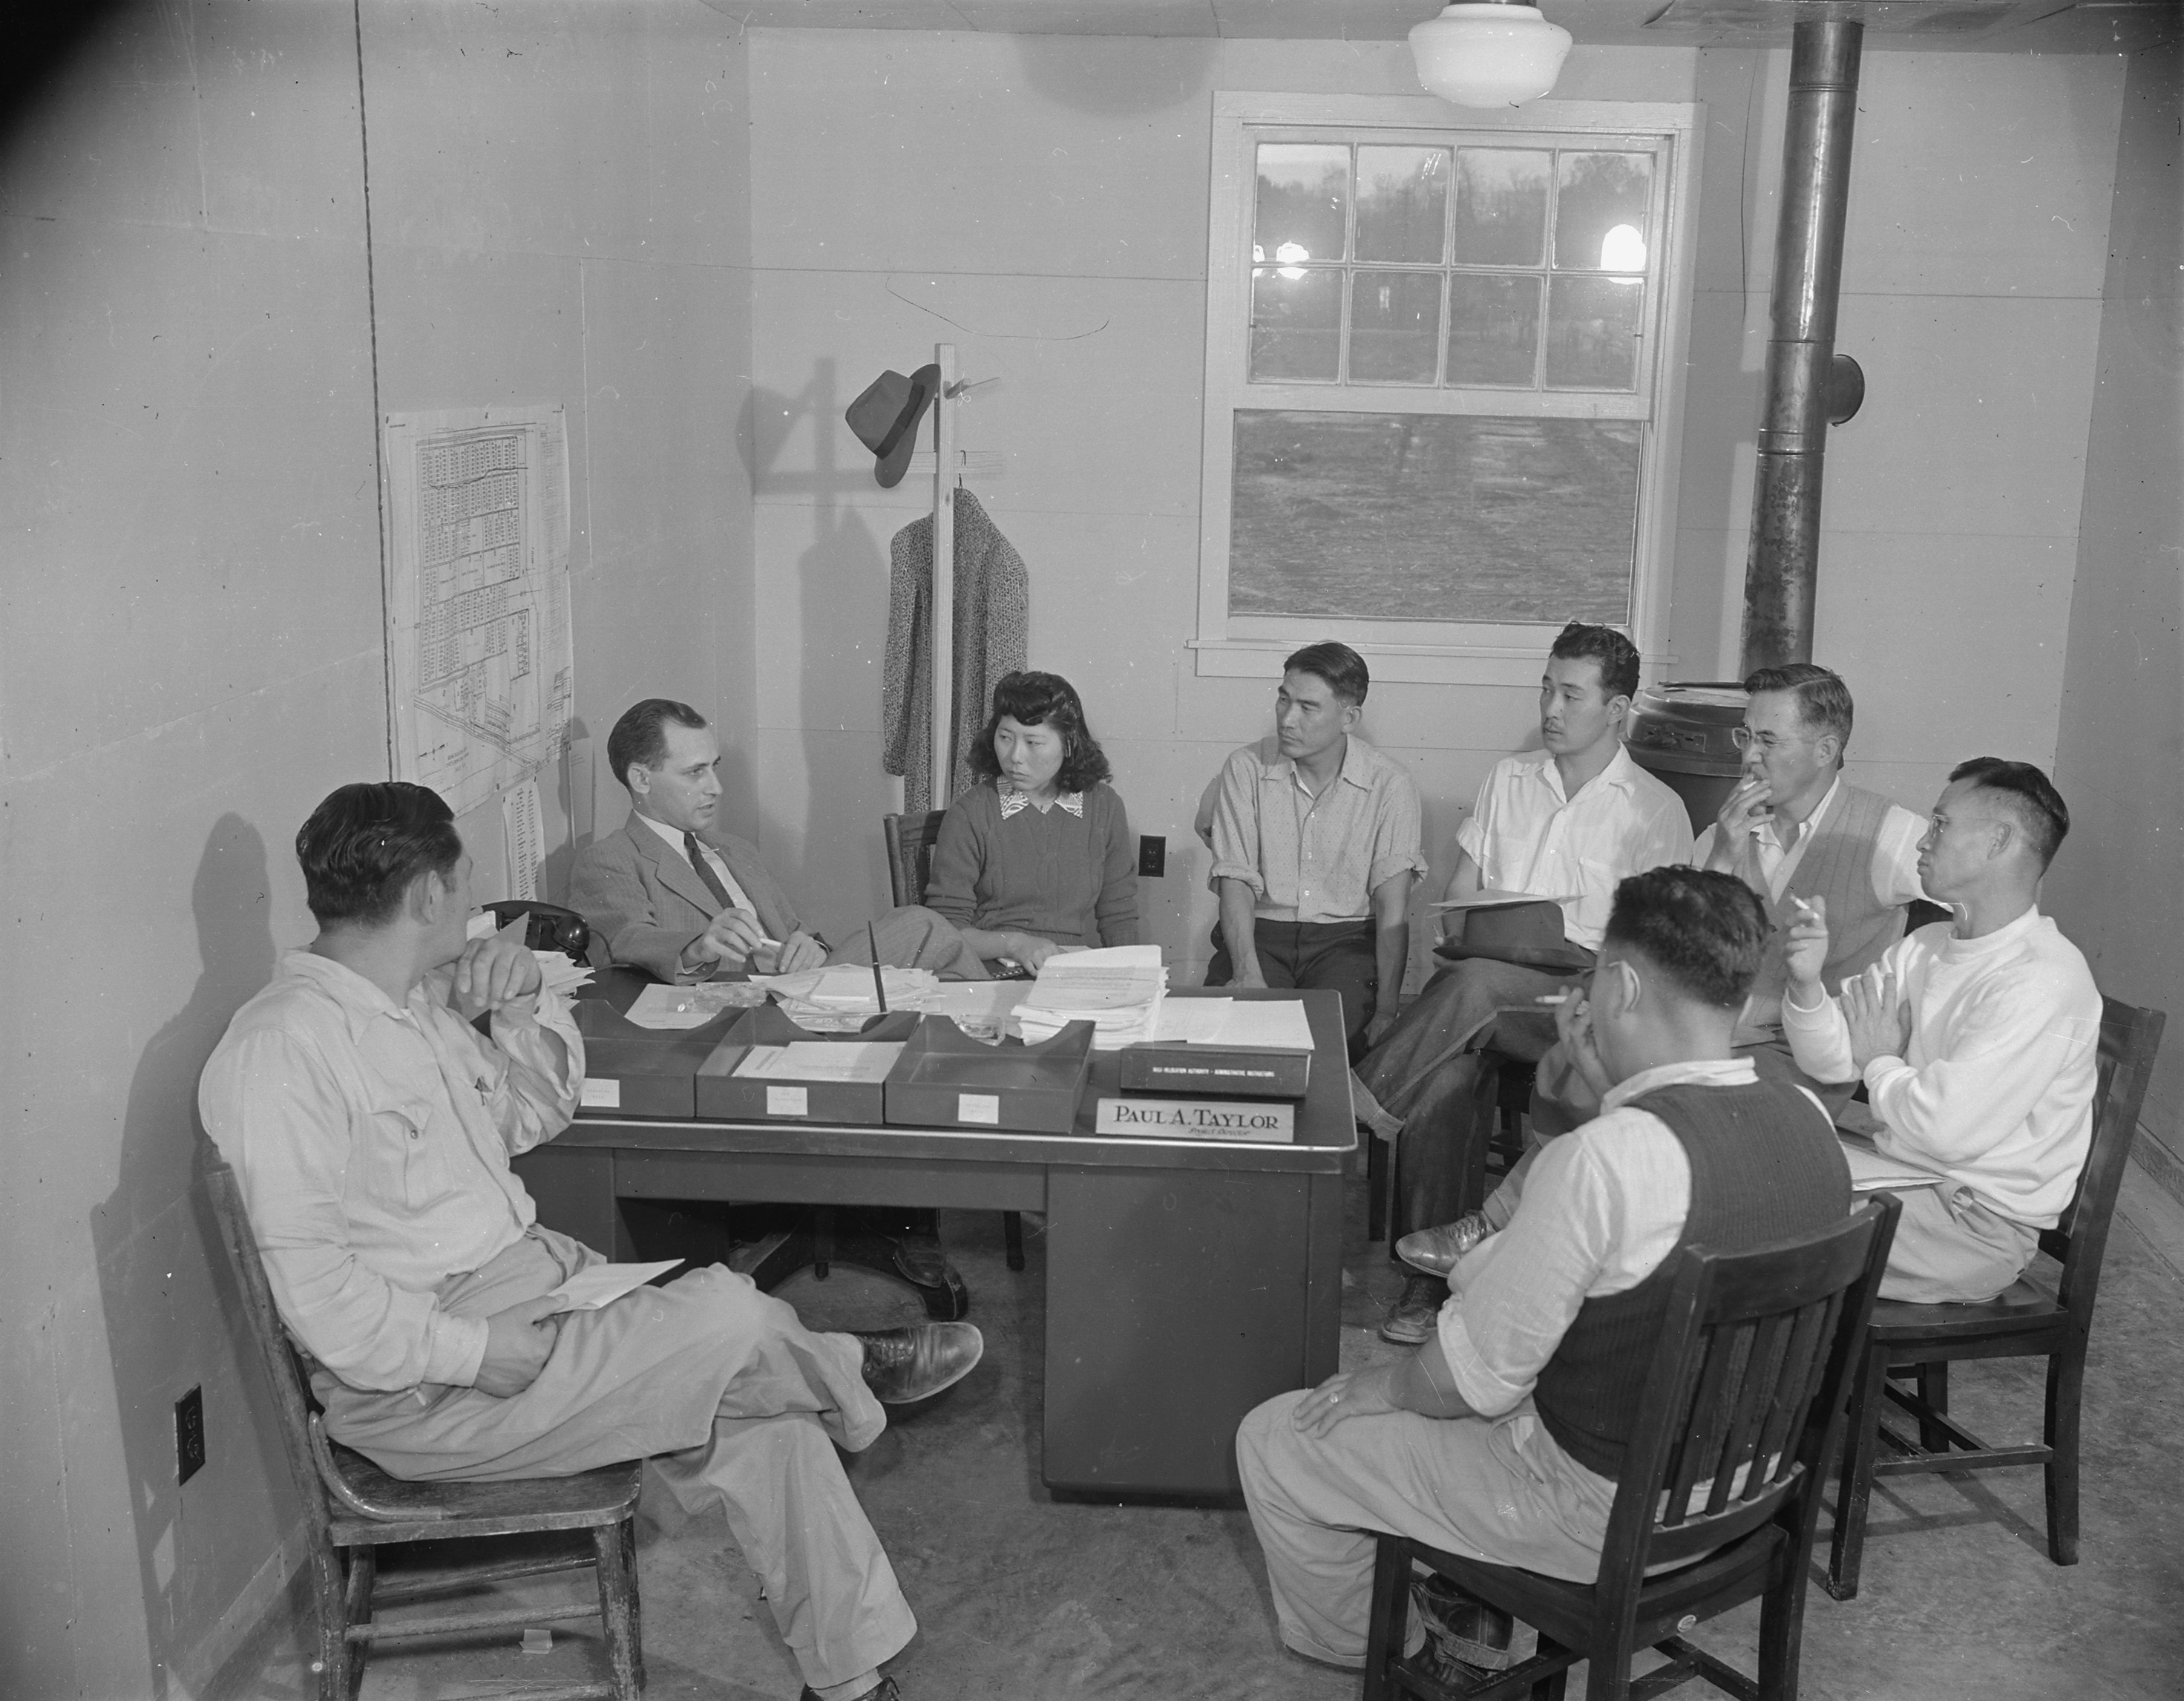 Project Director Paul Taylor speaking with the Council Committee of Jerome War Relocation Center, Arkansas, United States, 18 Nov 1942, photo 2 of 2